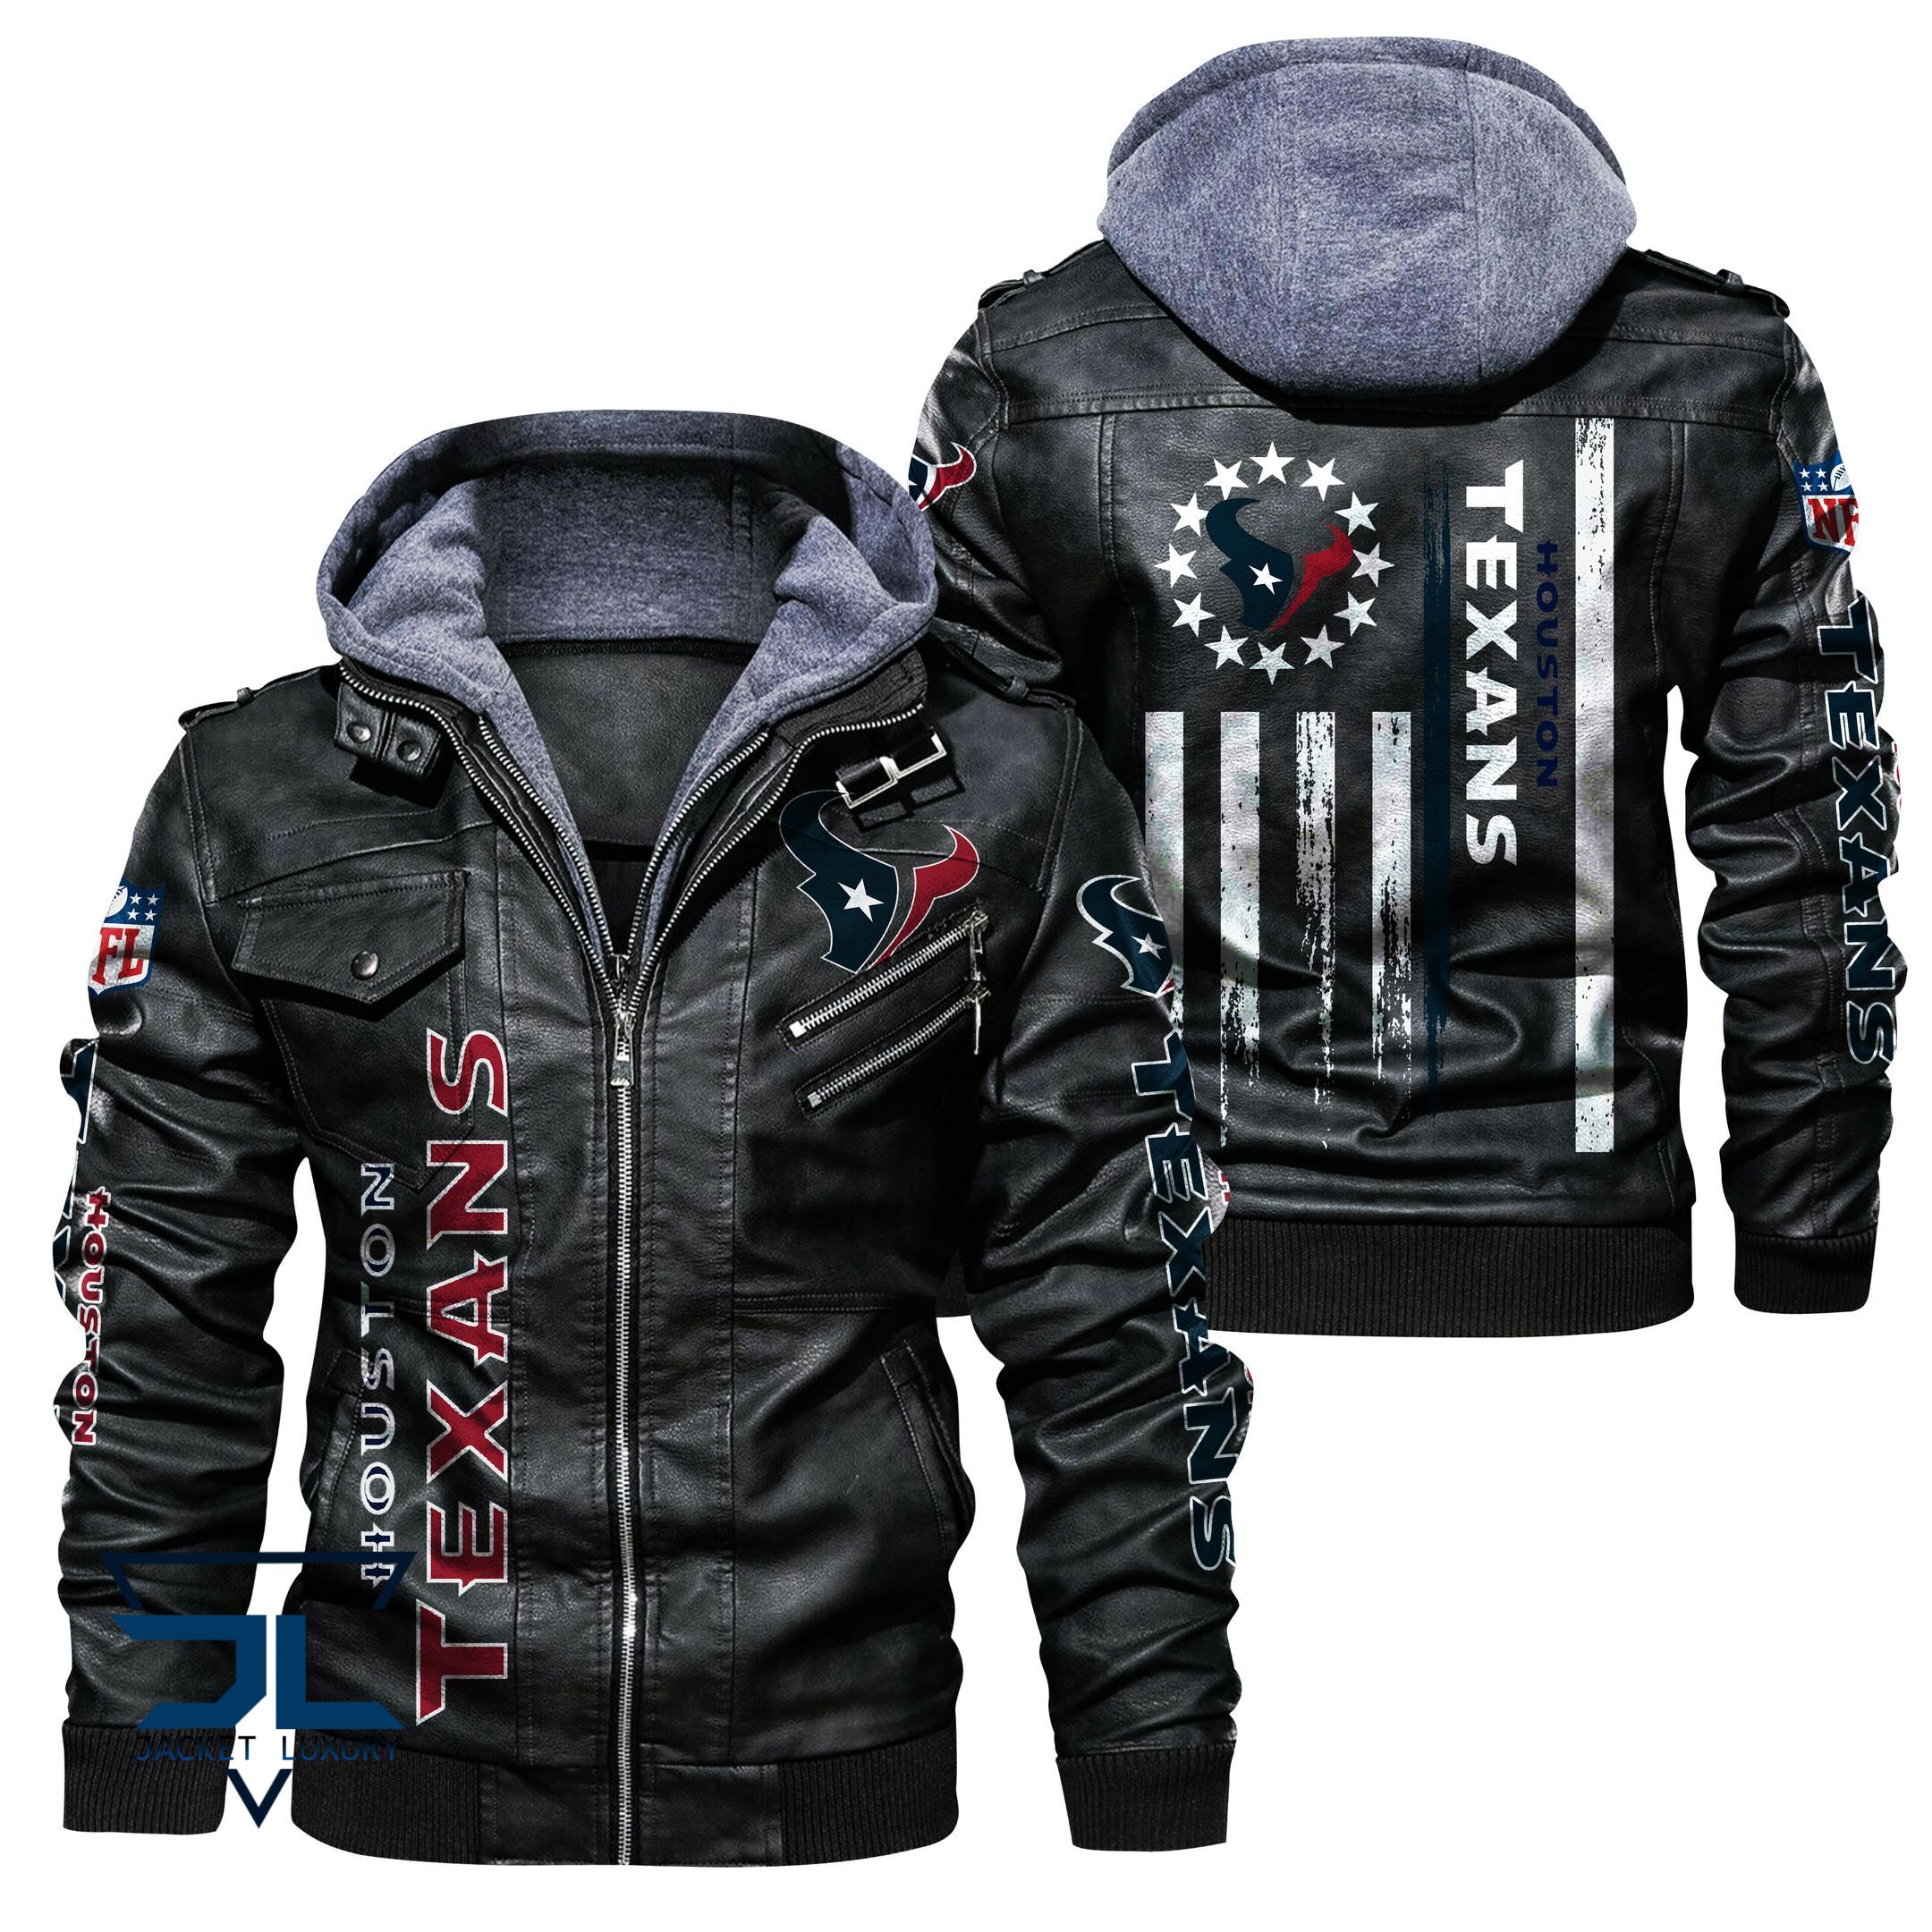 100+ best selling leather jacket on Tezostore 2022 117